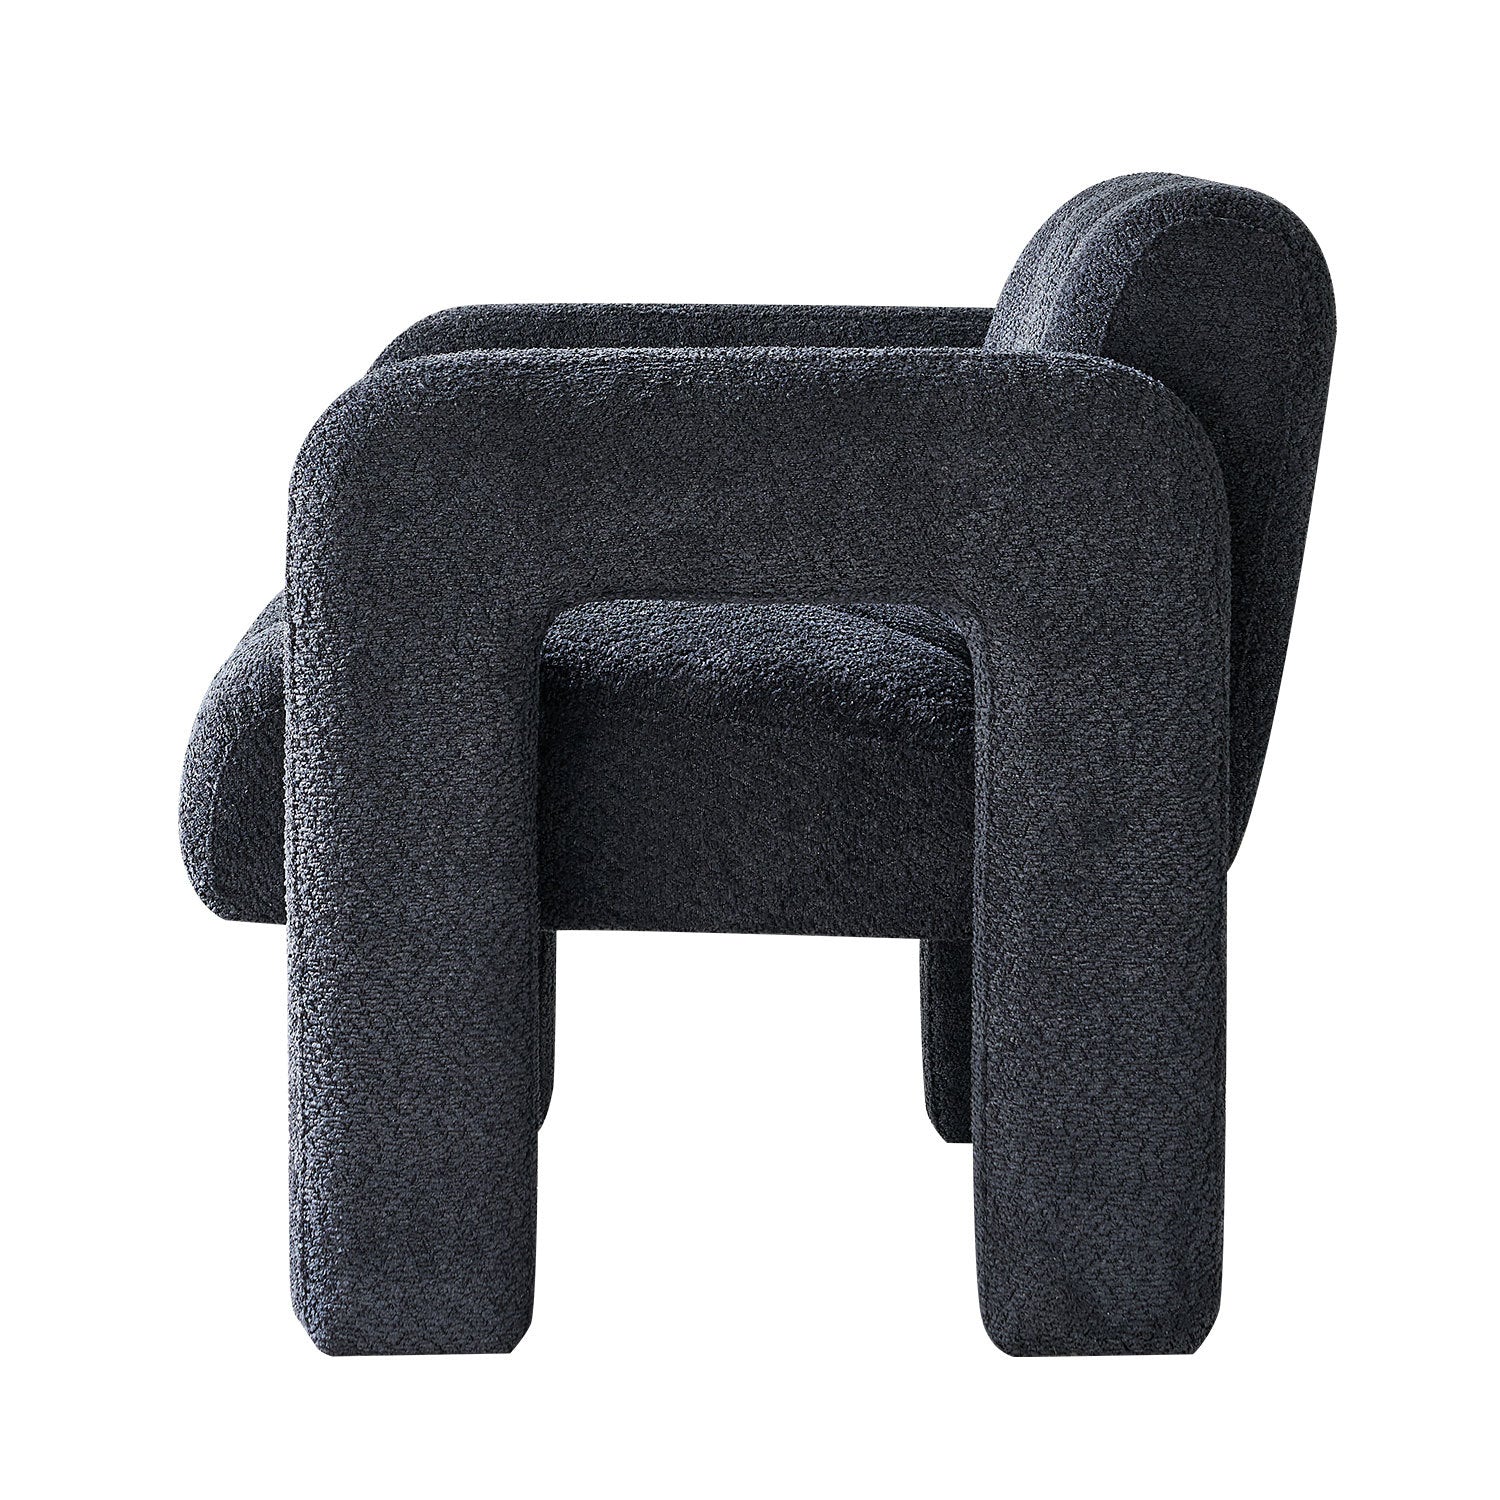 31.10" Wide Boucle Upholstered Accent Chair dark grey-primary living space-modern-fiber foam